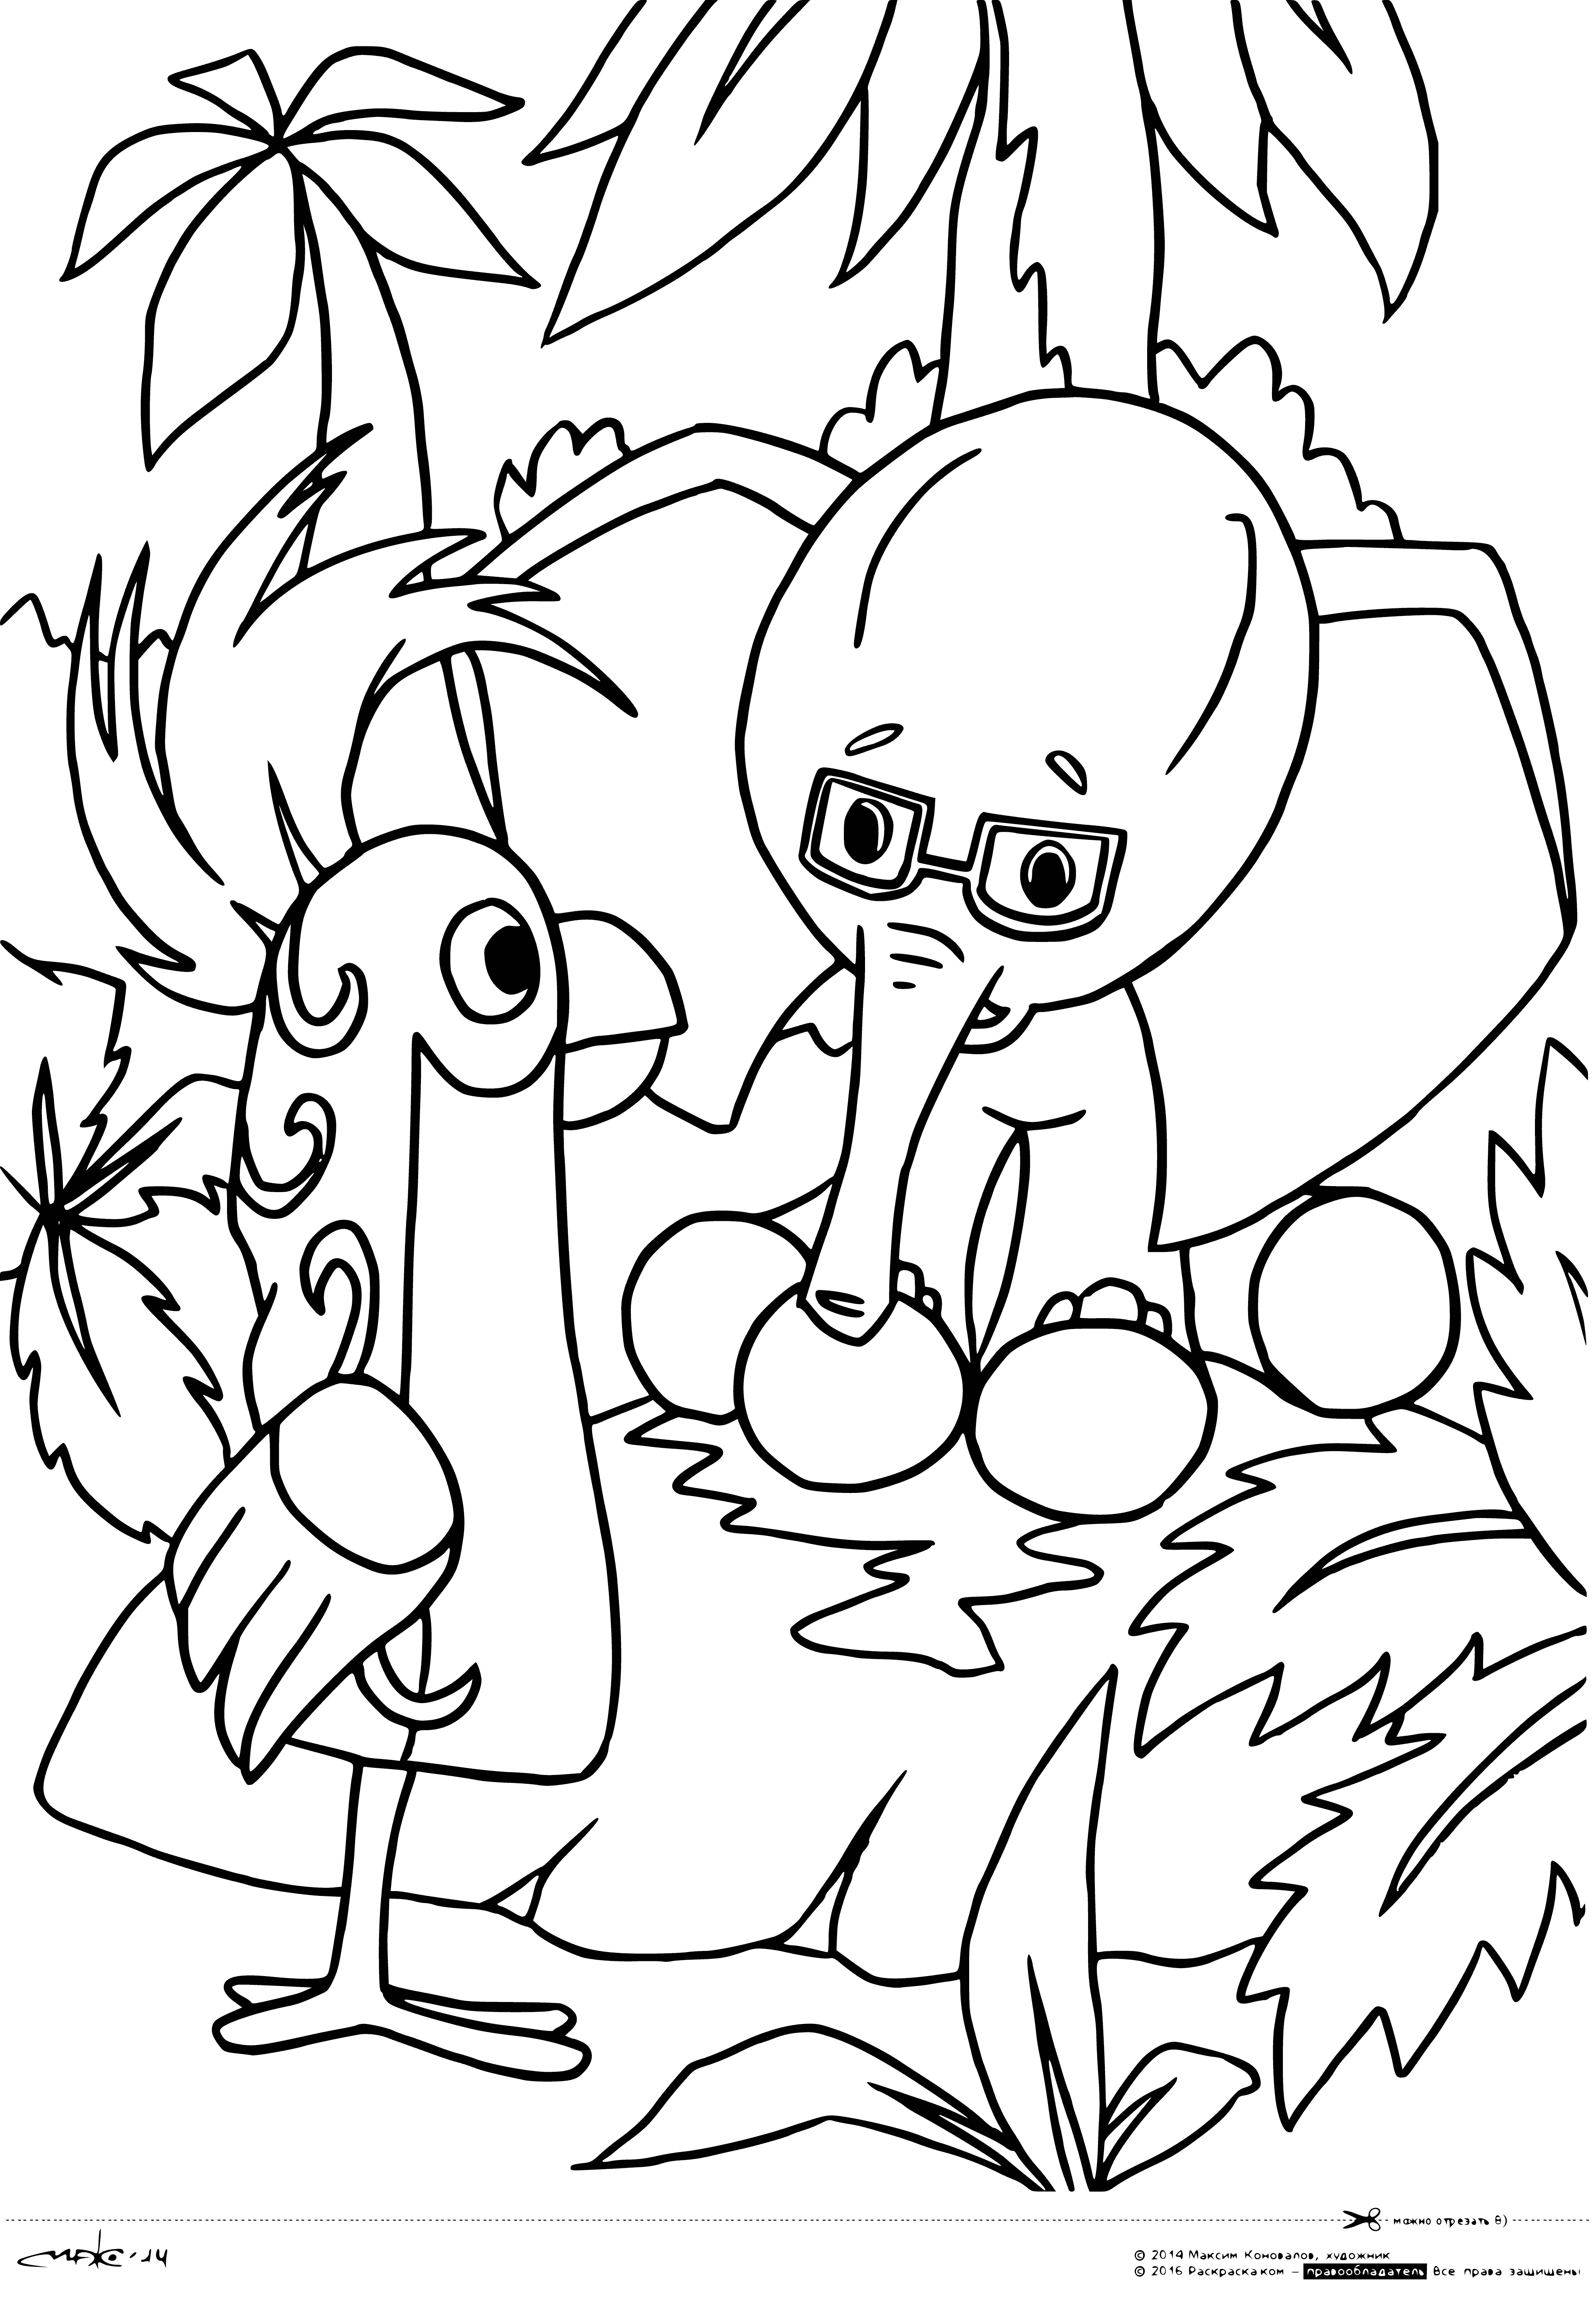 coloring page: 38 parrots & a baby elephant, some brightly colored & some more subdued, grace a coloring page, together on a branch. #coloring #elephant